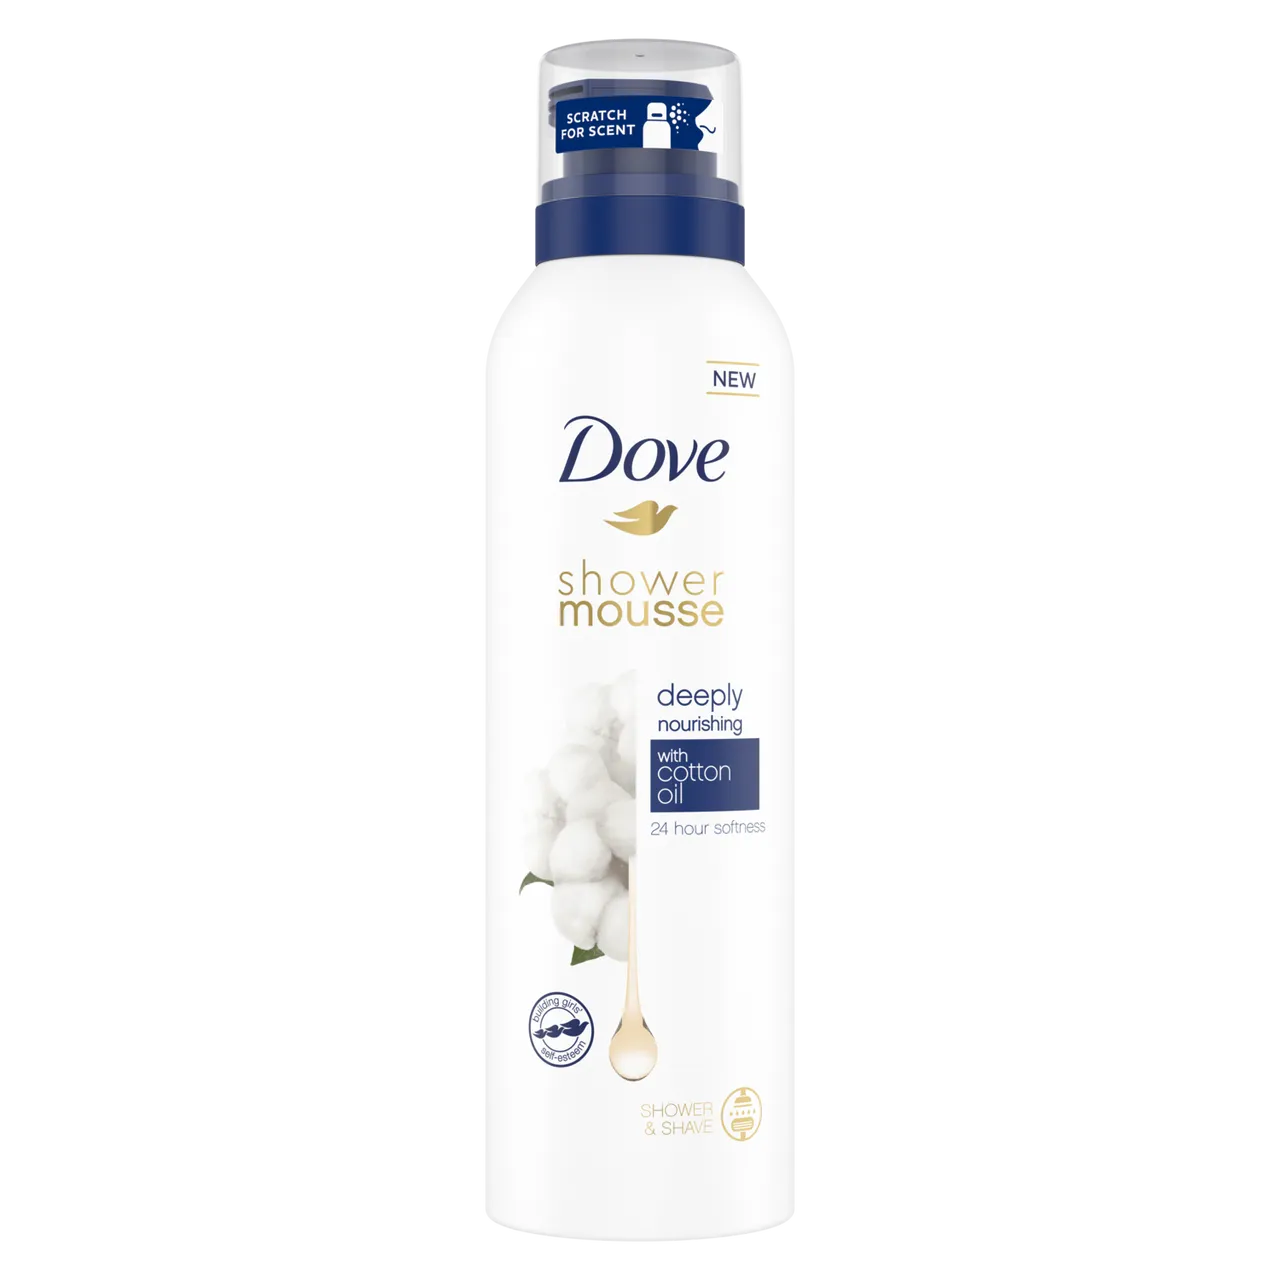 Dove Deeply Nourishing Shower Mousse